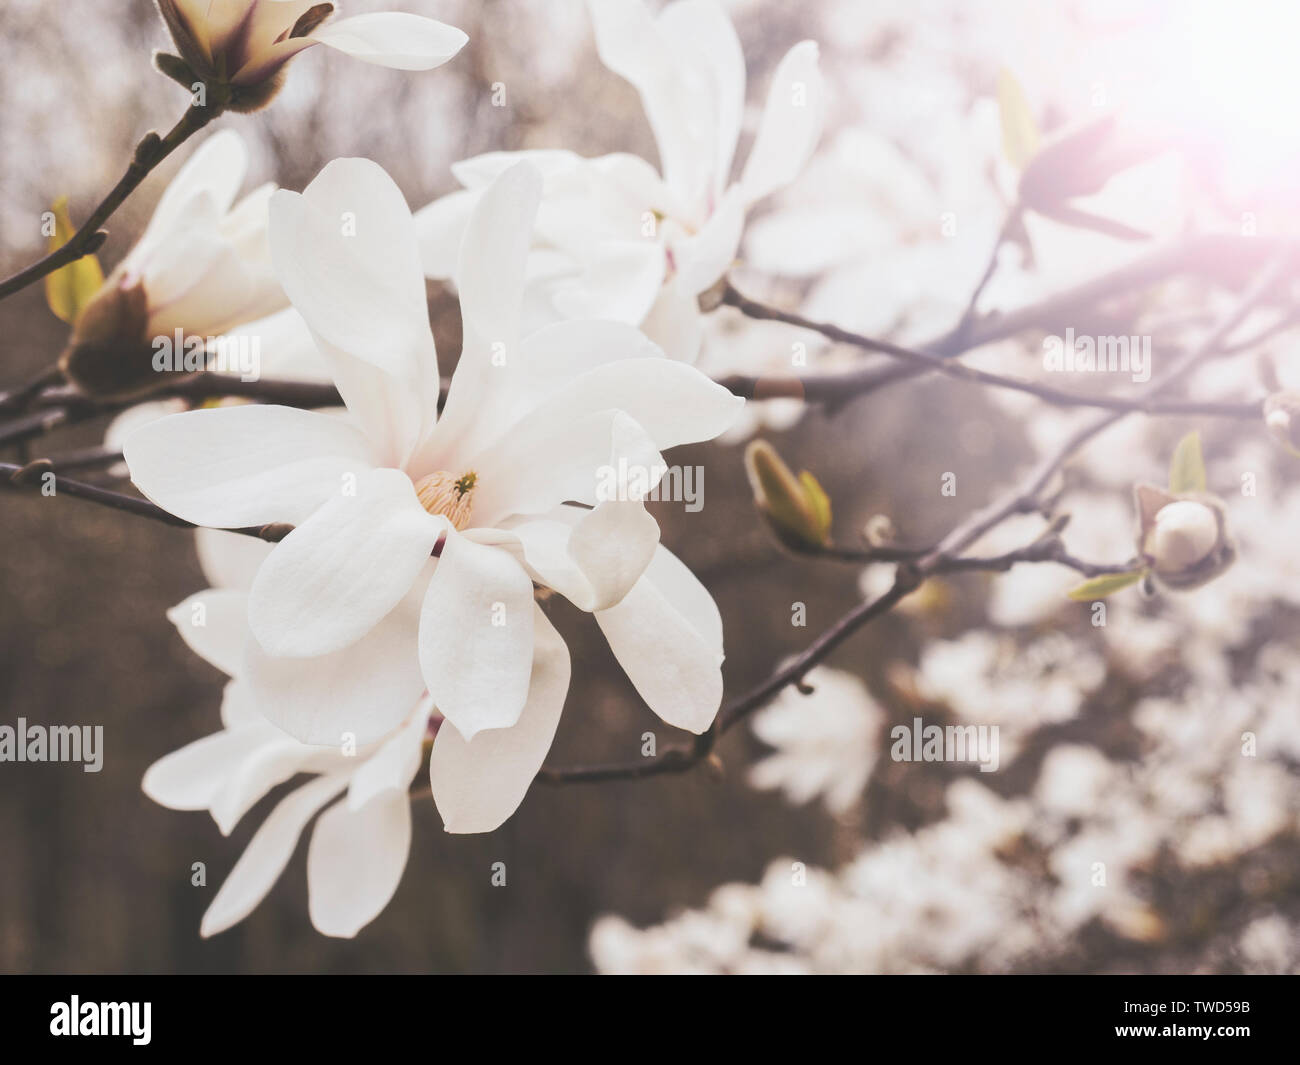 Magnolia flowers, muted colors, high key Stock Photo